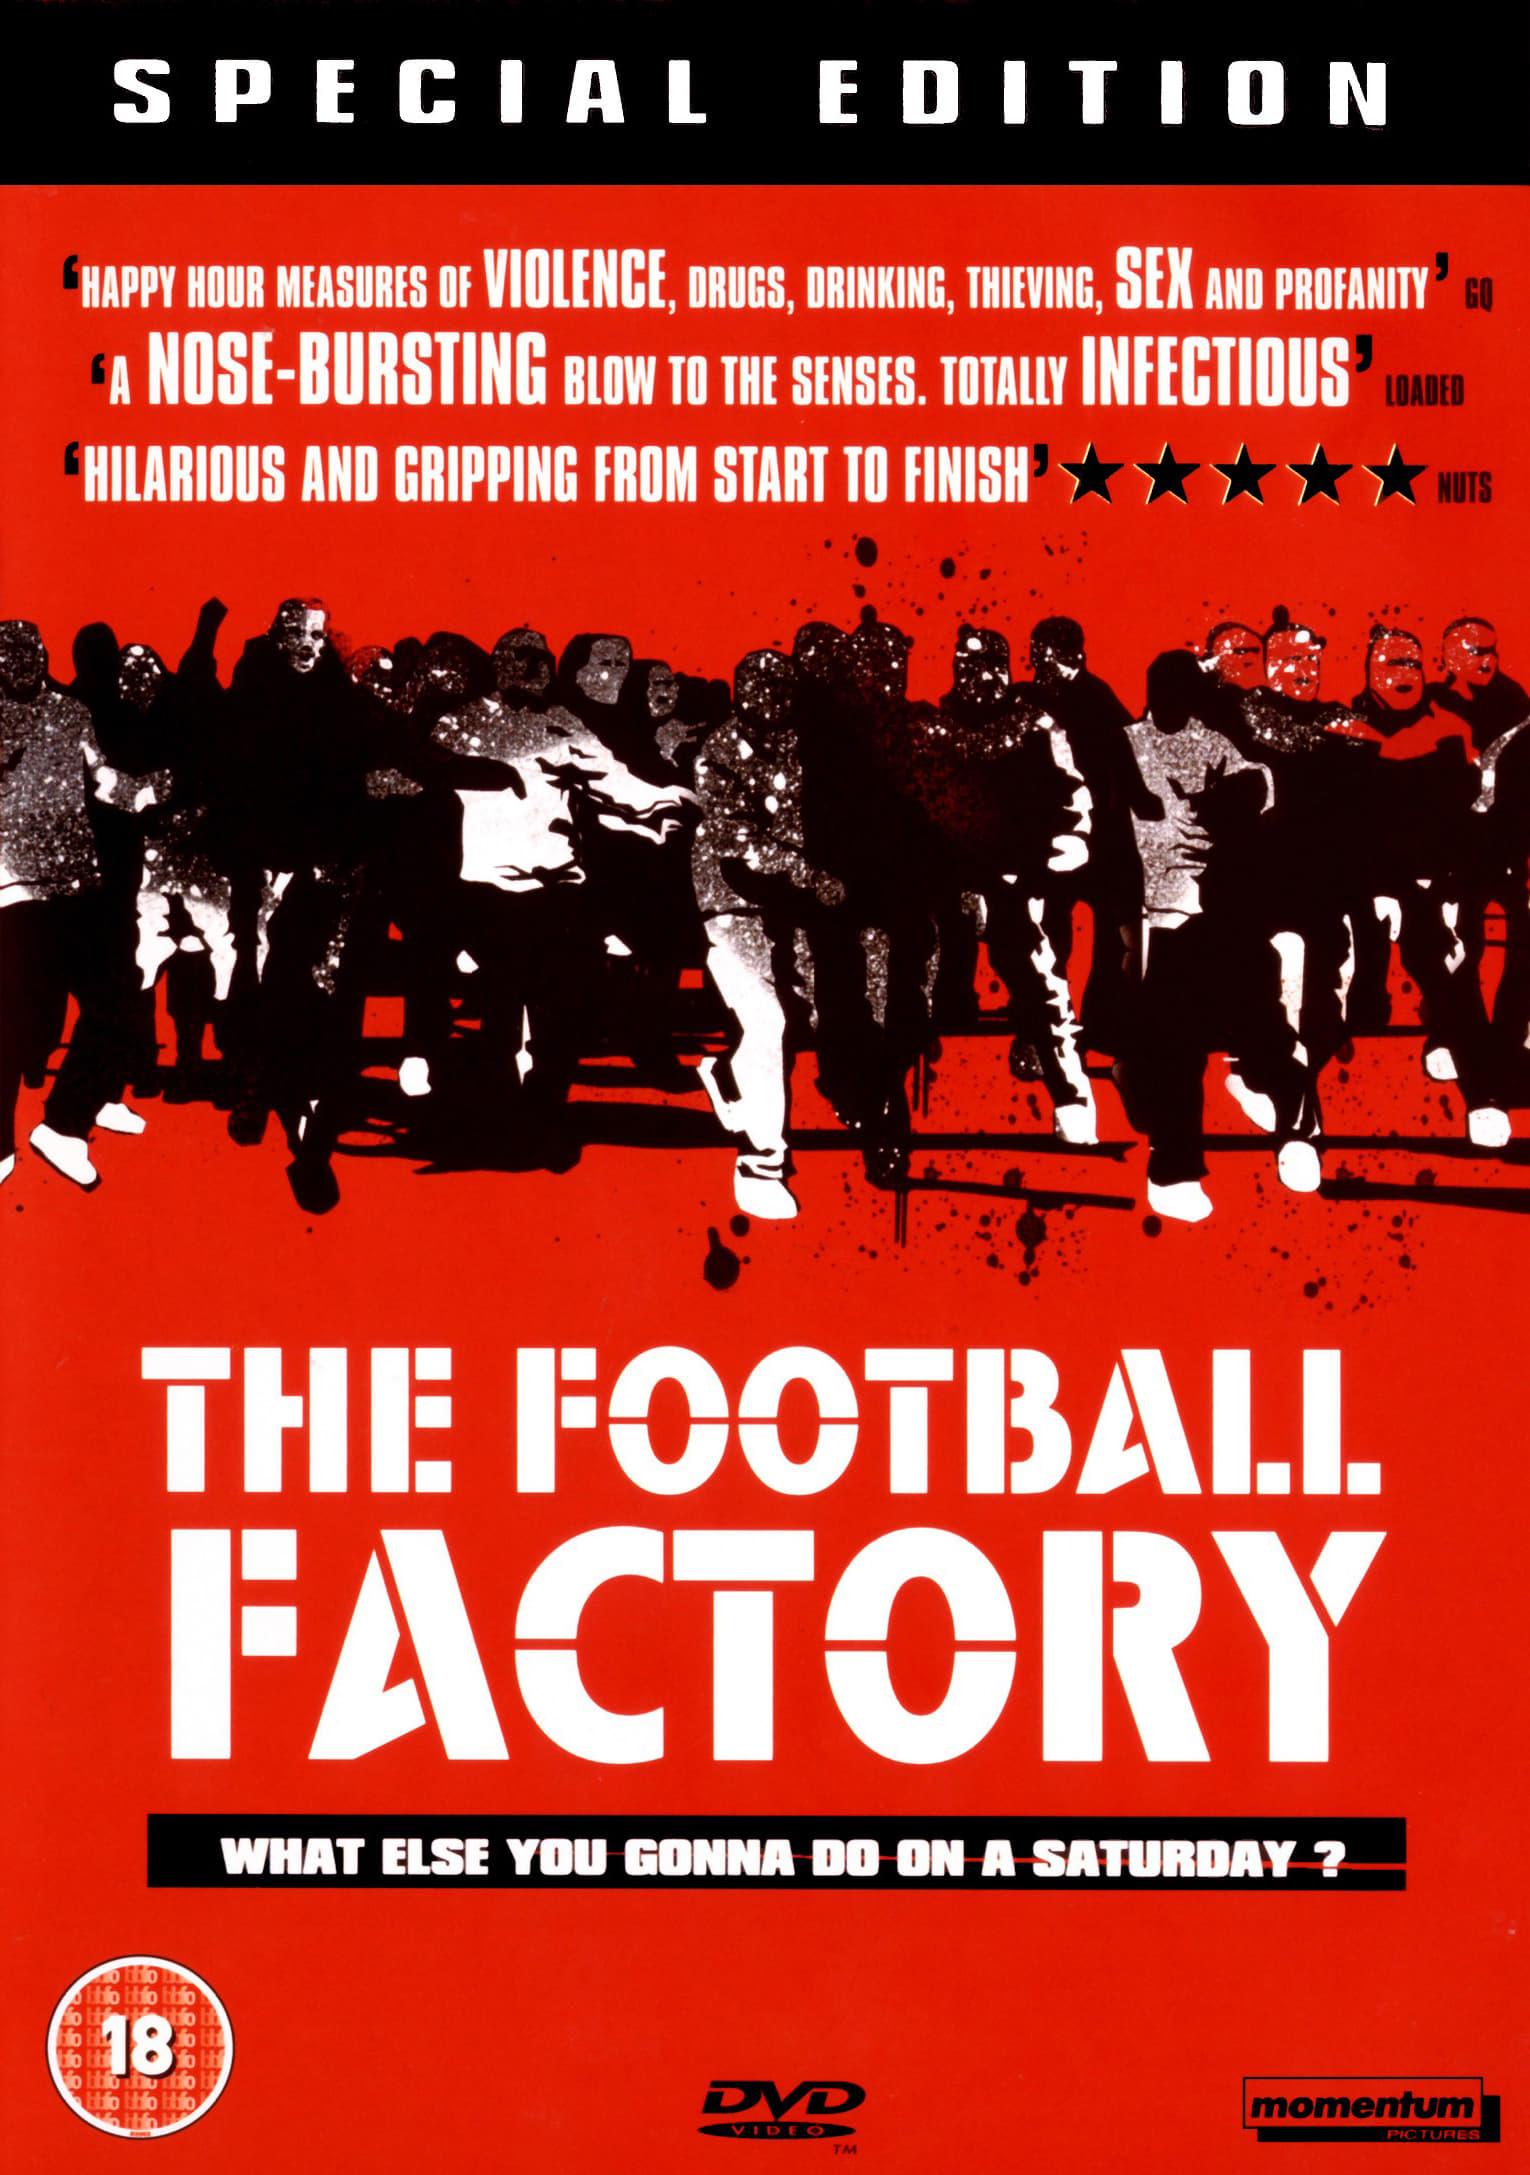 The Football Factory poster